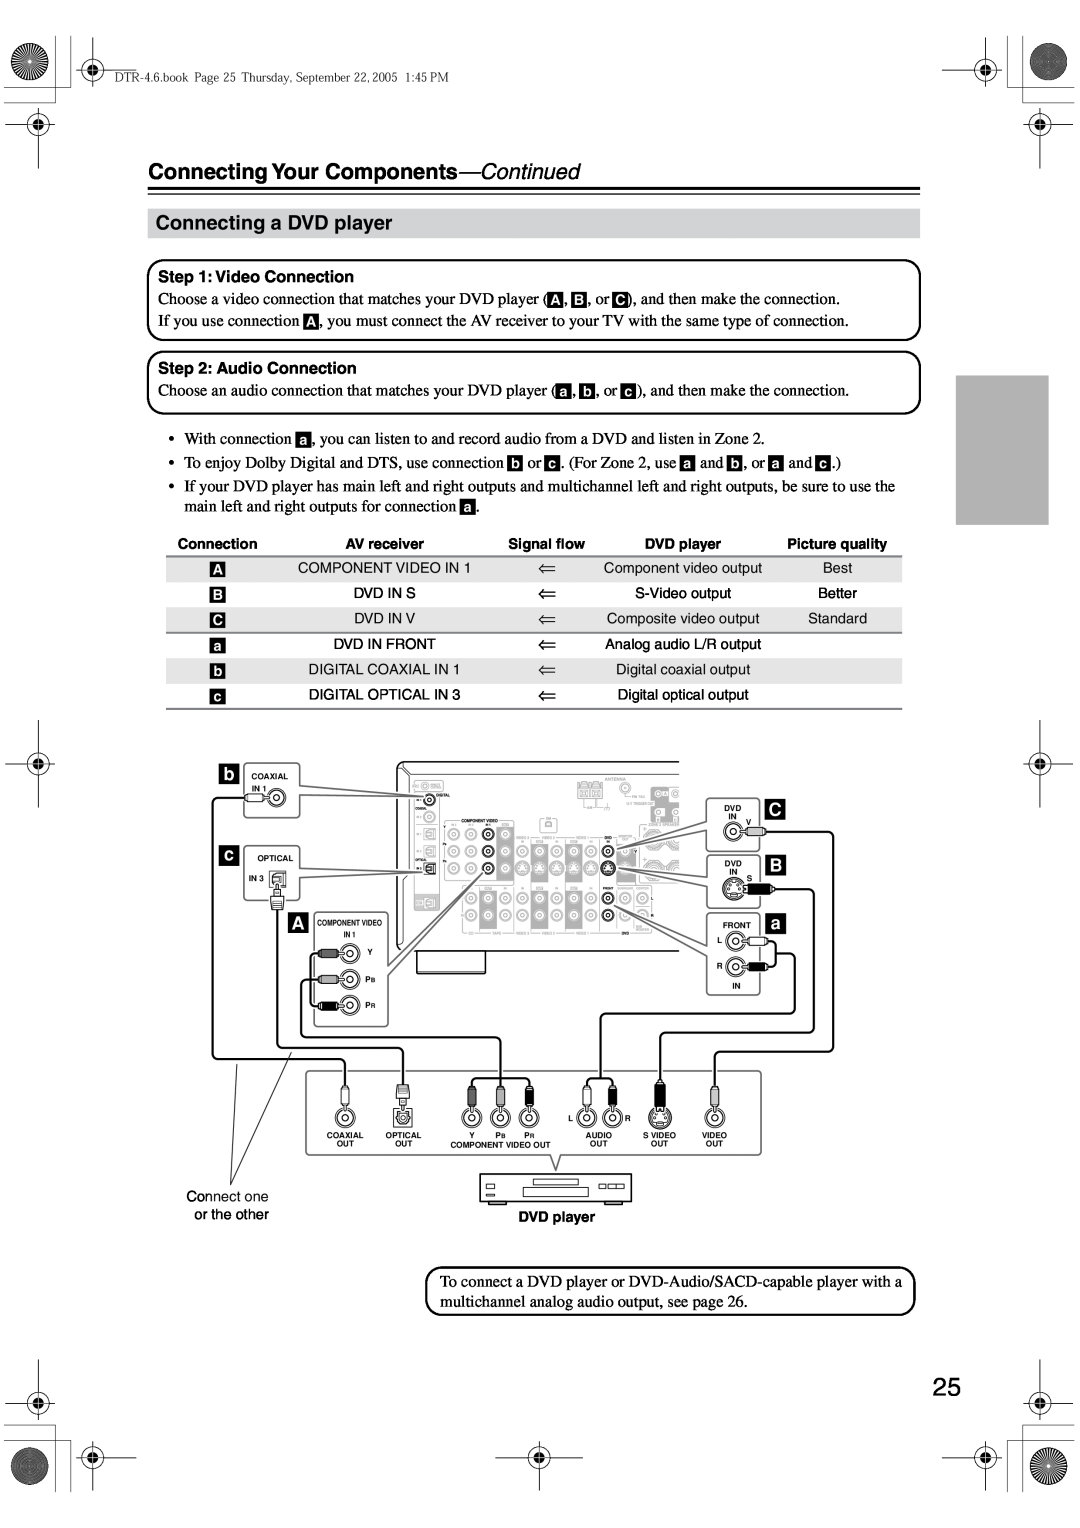 Integra DTR-4.6 instruction manual Connecting a DVD player, Connecting Your Components-Continued, C B a, or the other 